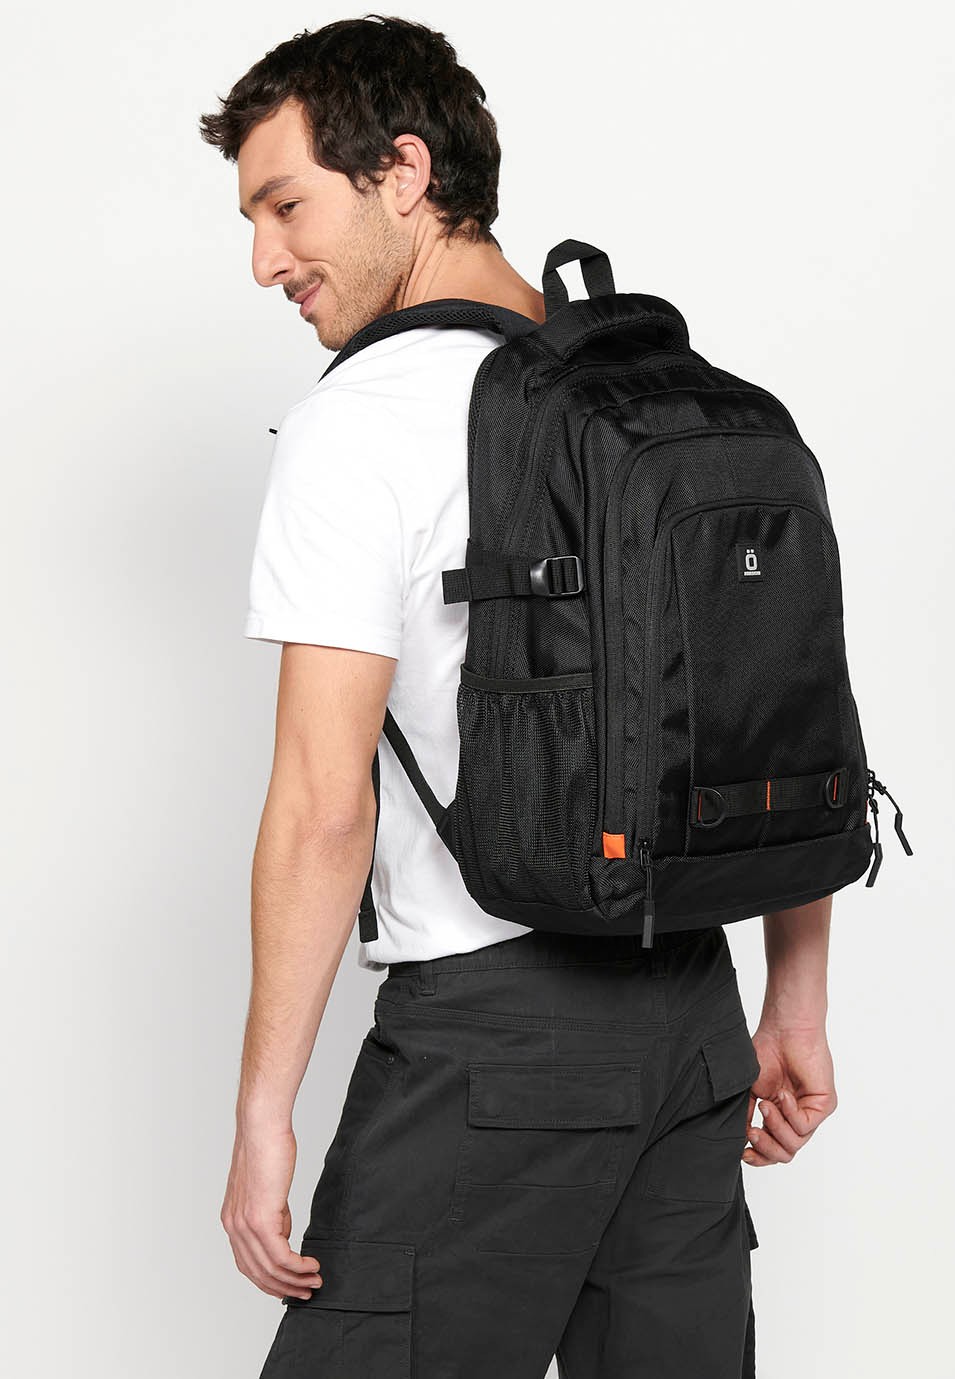 Koröshi backpack with three zippered compartments, one for a laptop, with black interior pockets 6